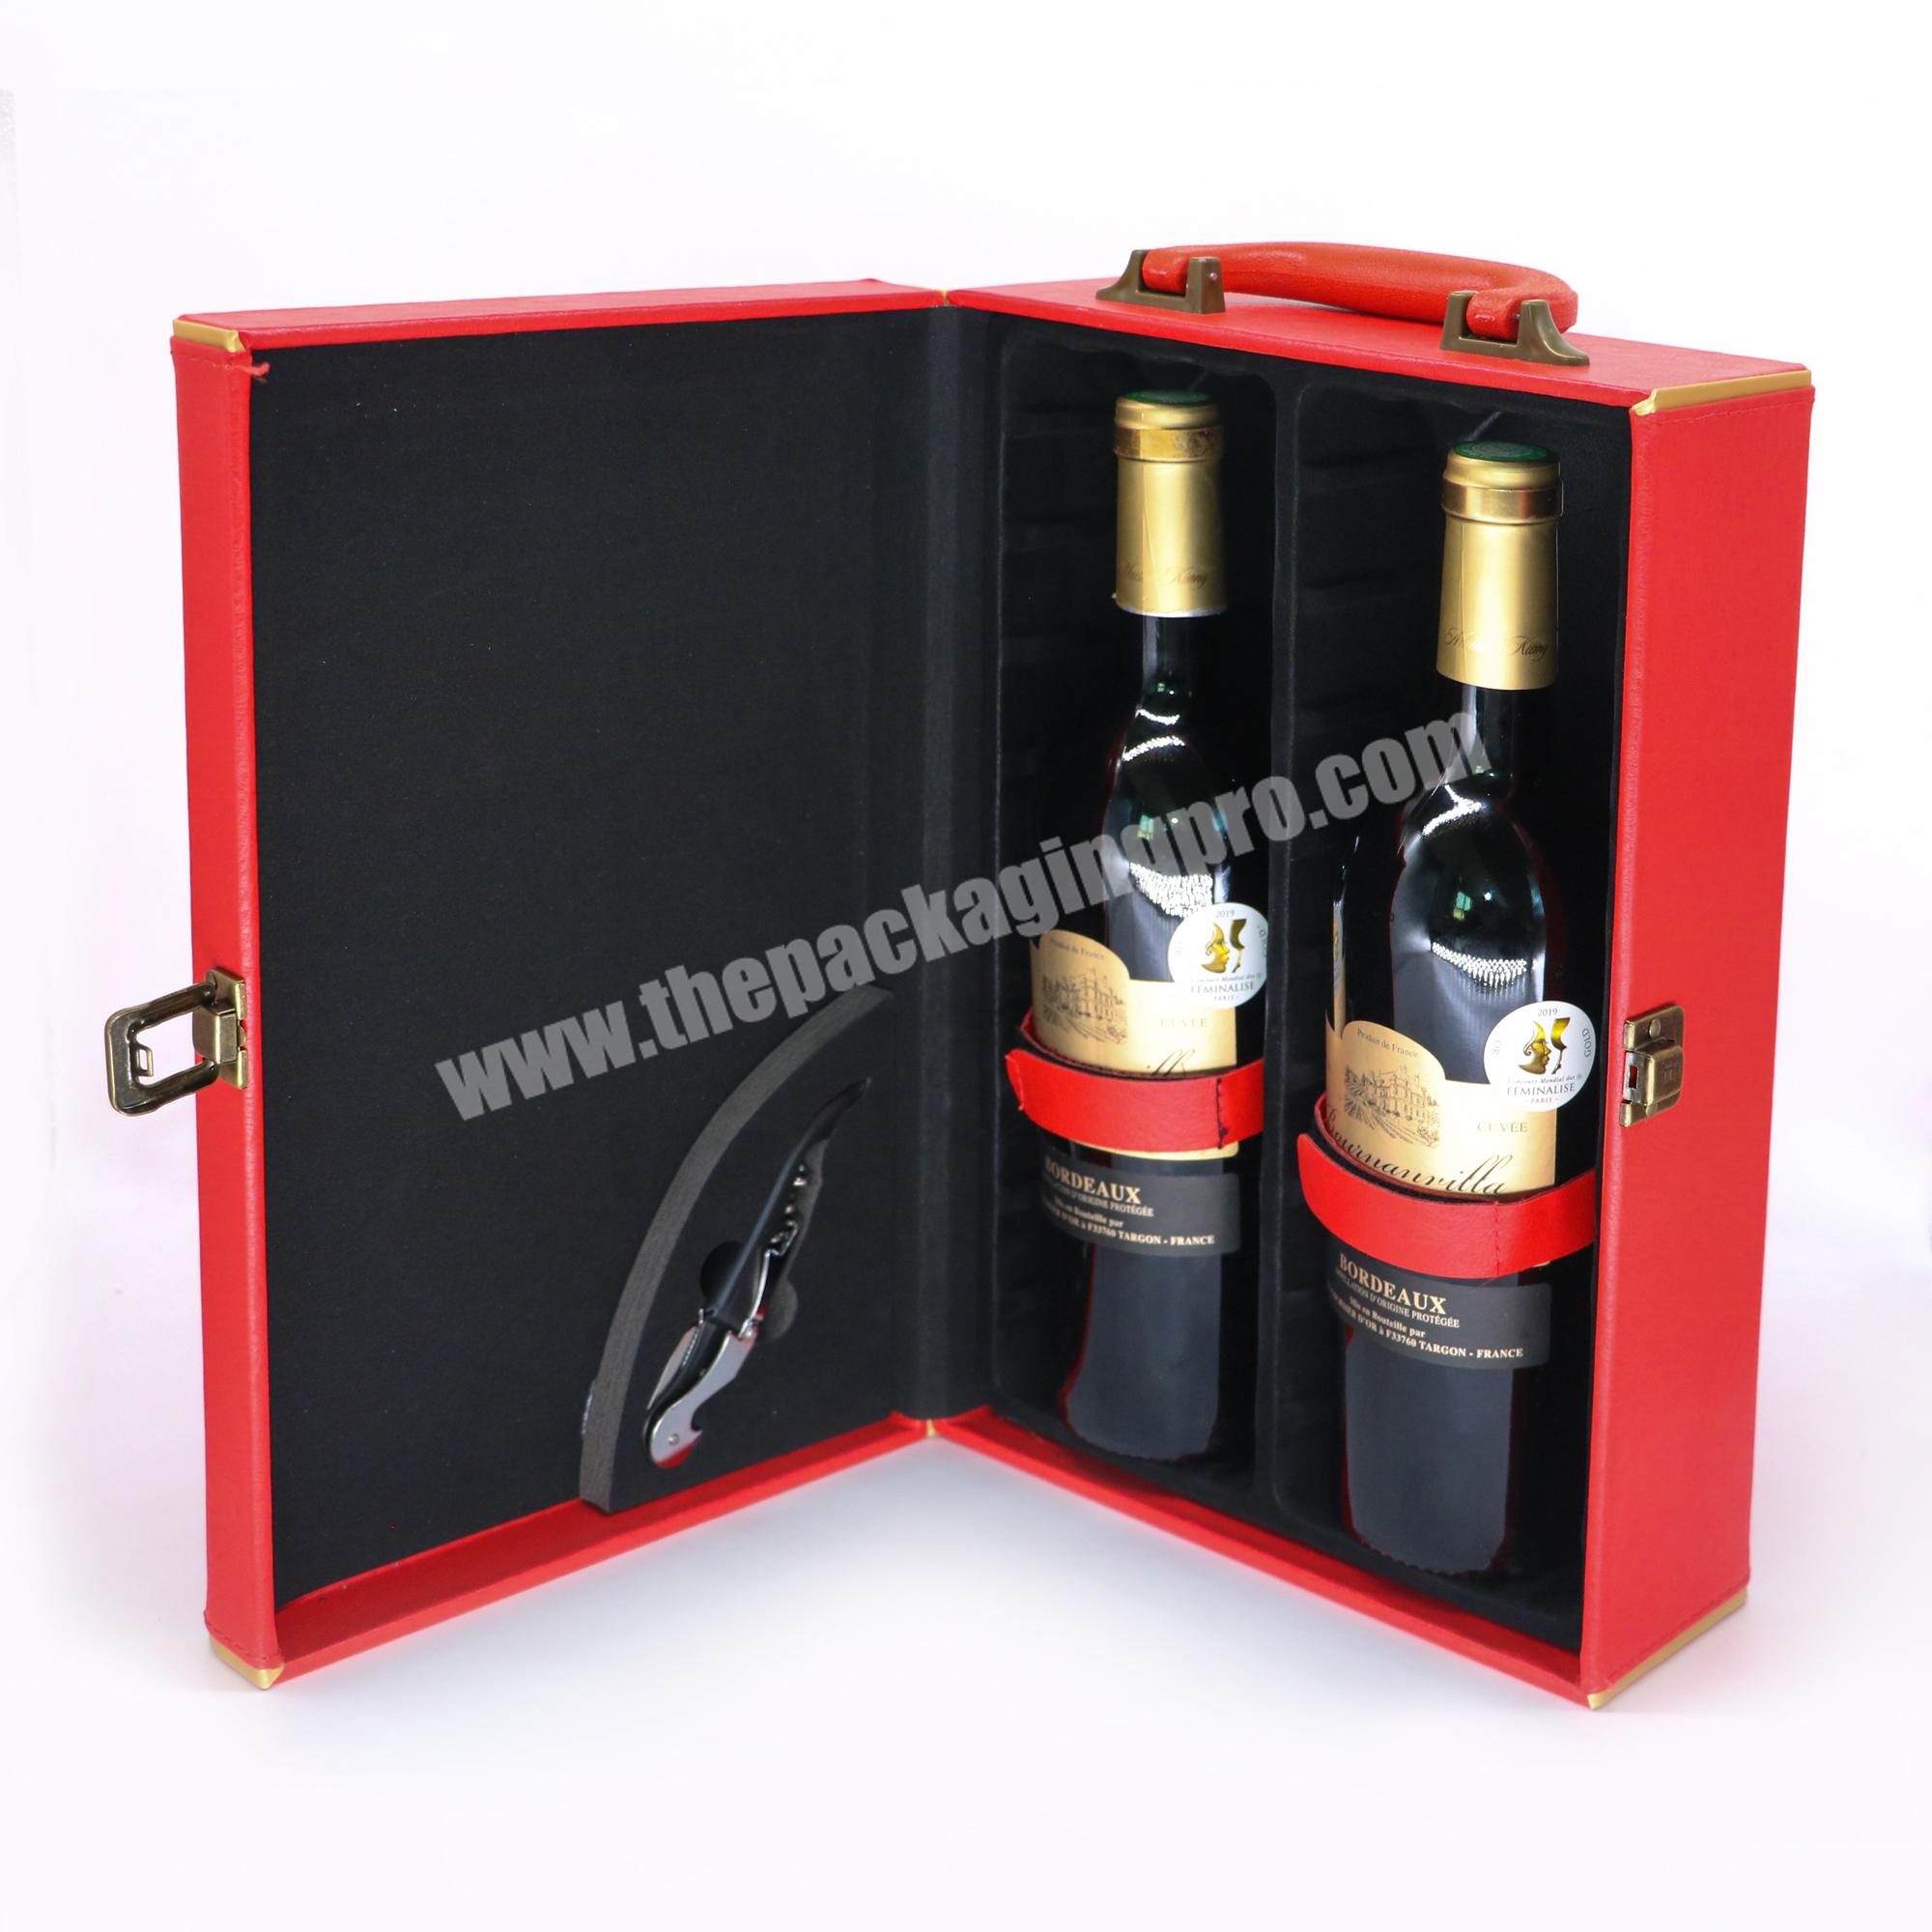 Low price wine opener gift box portable wine gift leather box wine boxes packaging